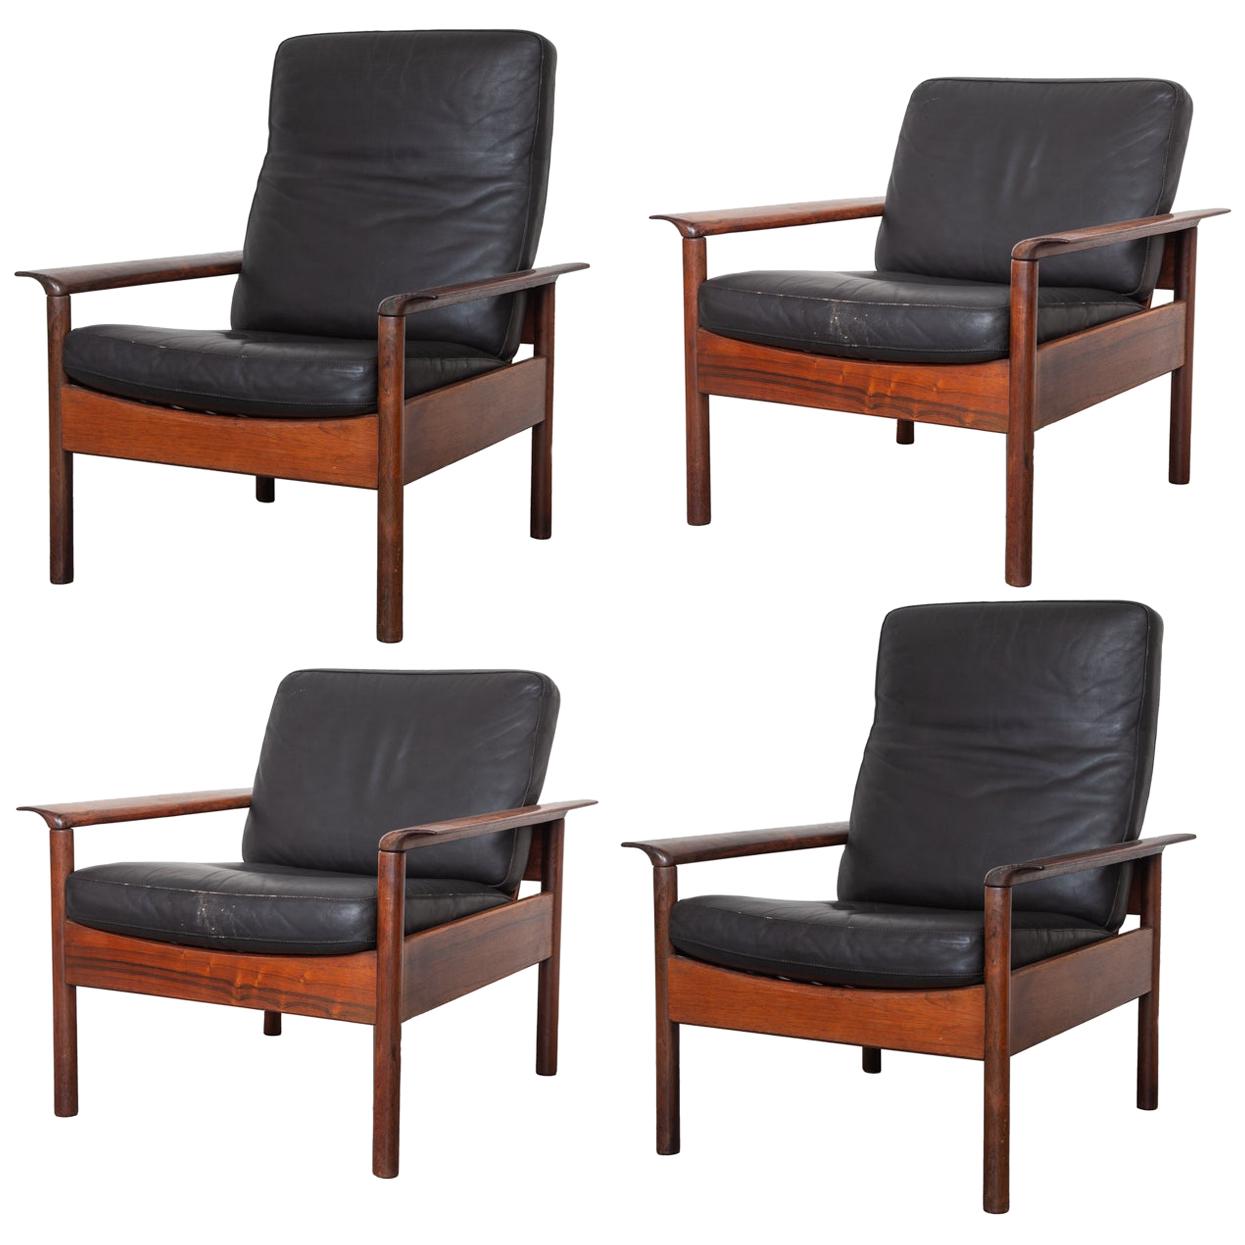 Livingroom Set in Style of Otto Hans Olsen Lounge Chairs Black Leather, 1950s